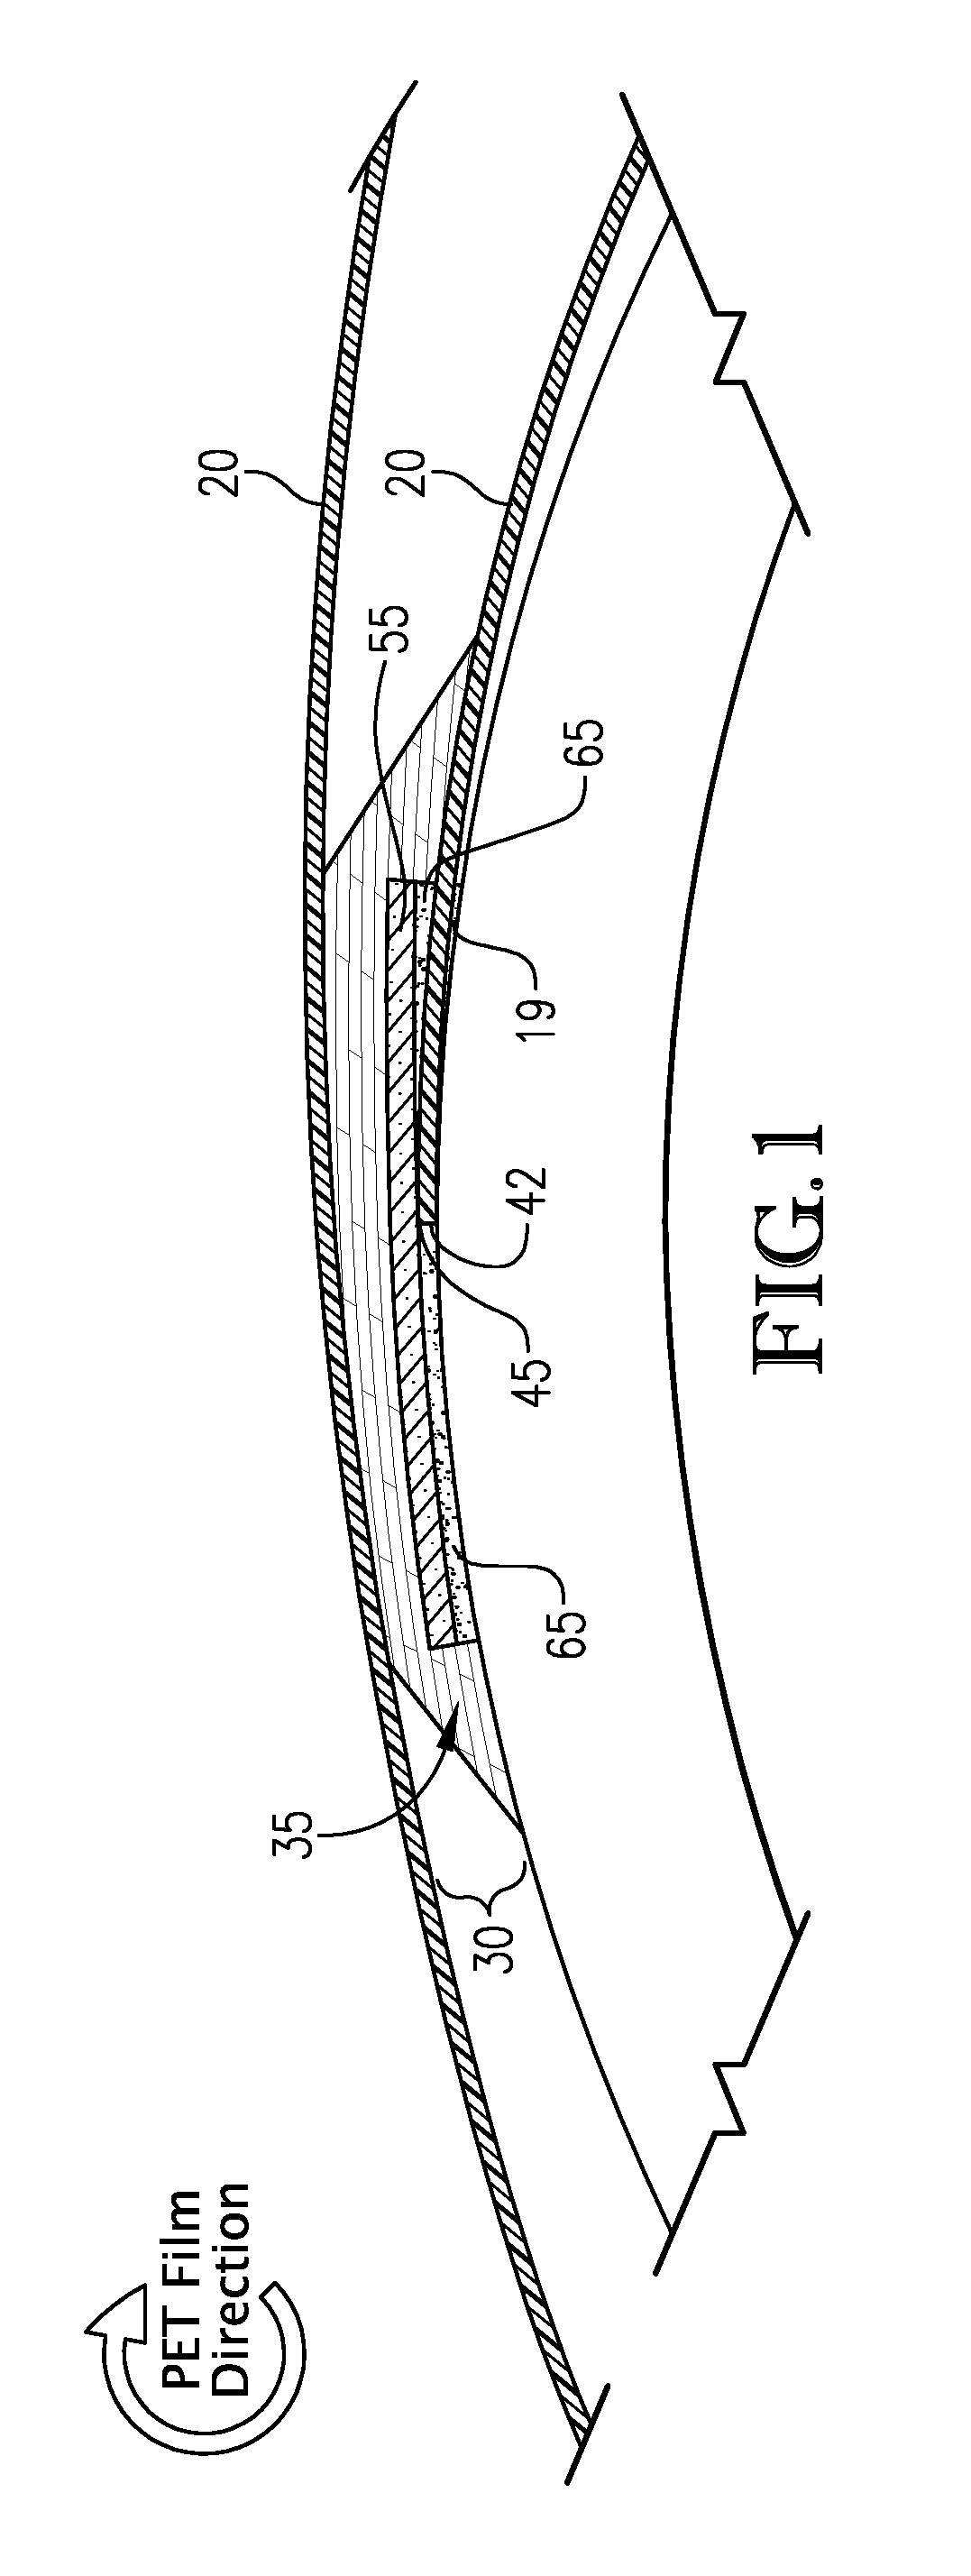 Packaged flexible film and flexible film packaging system therefor